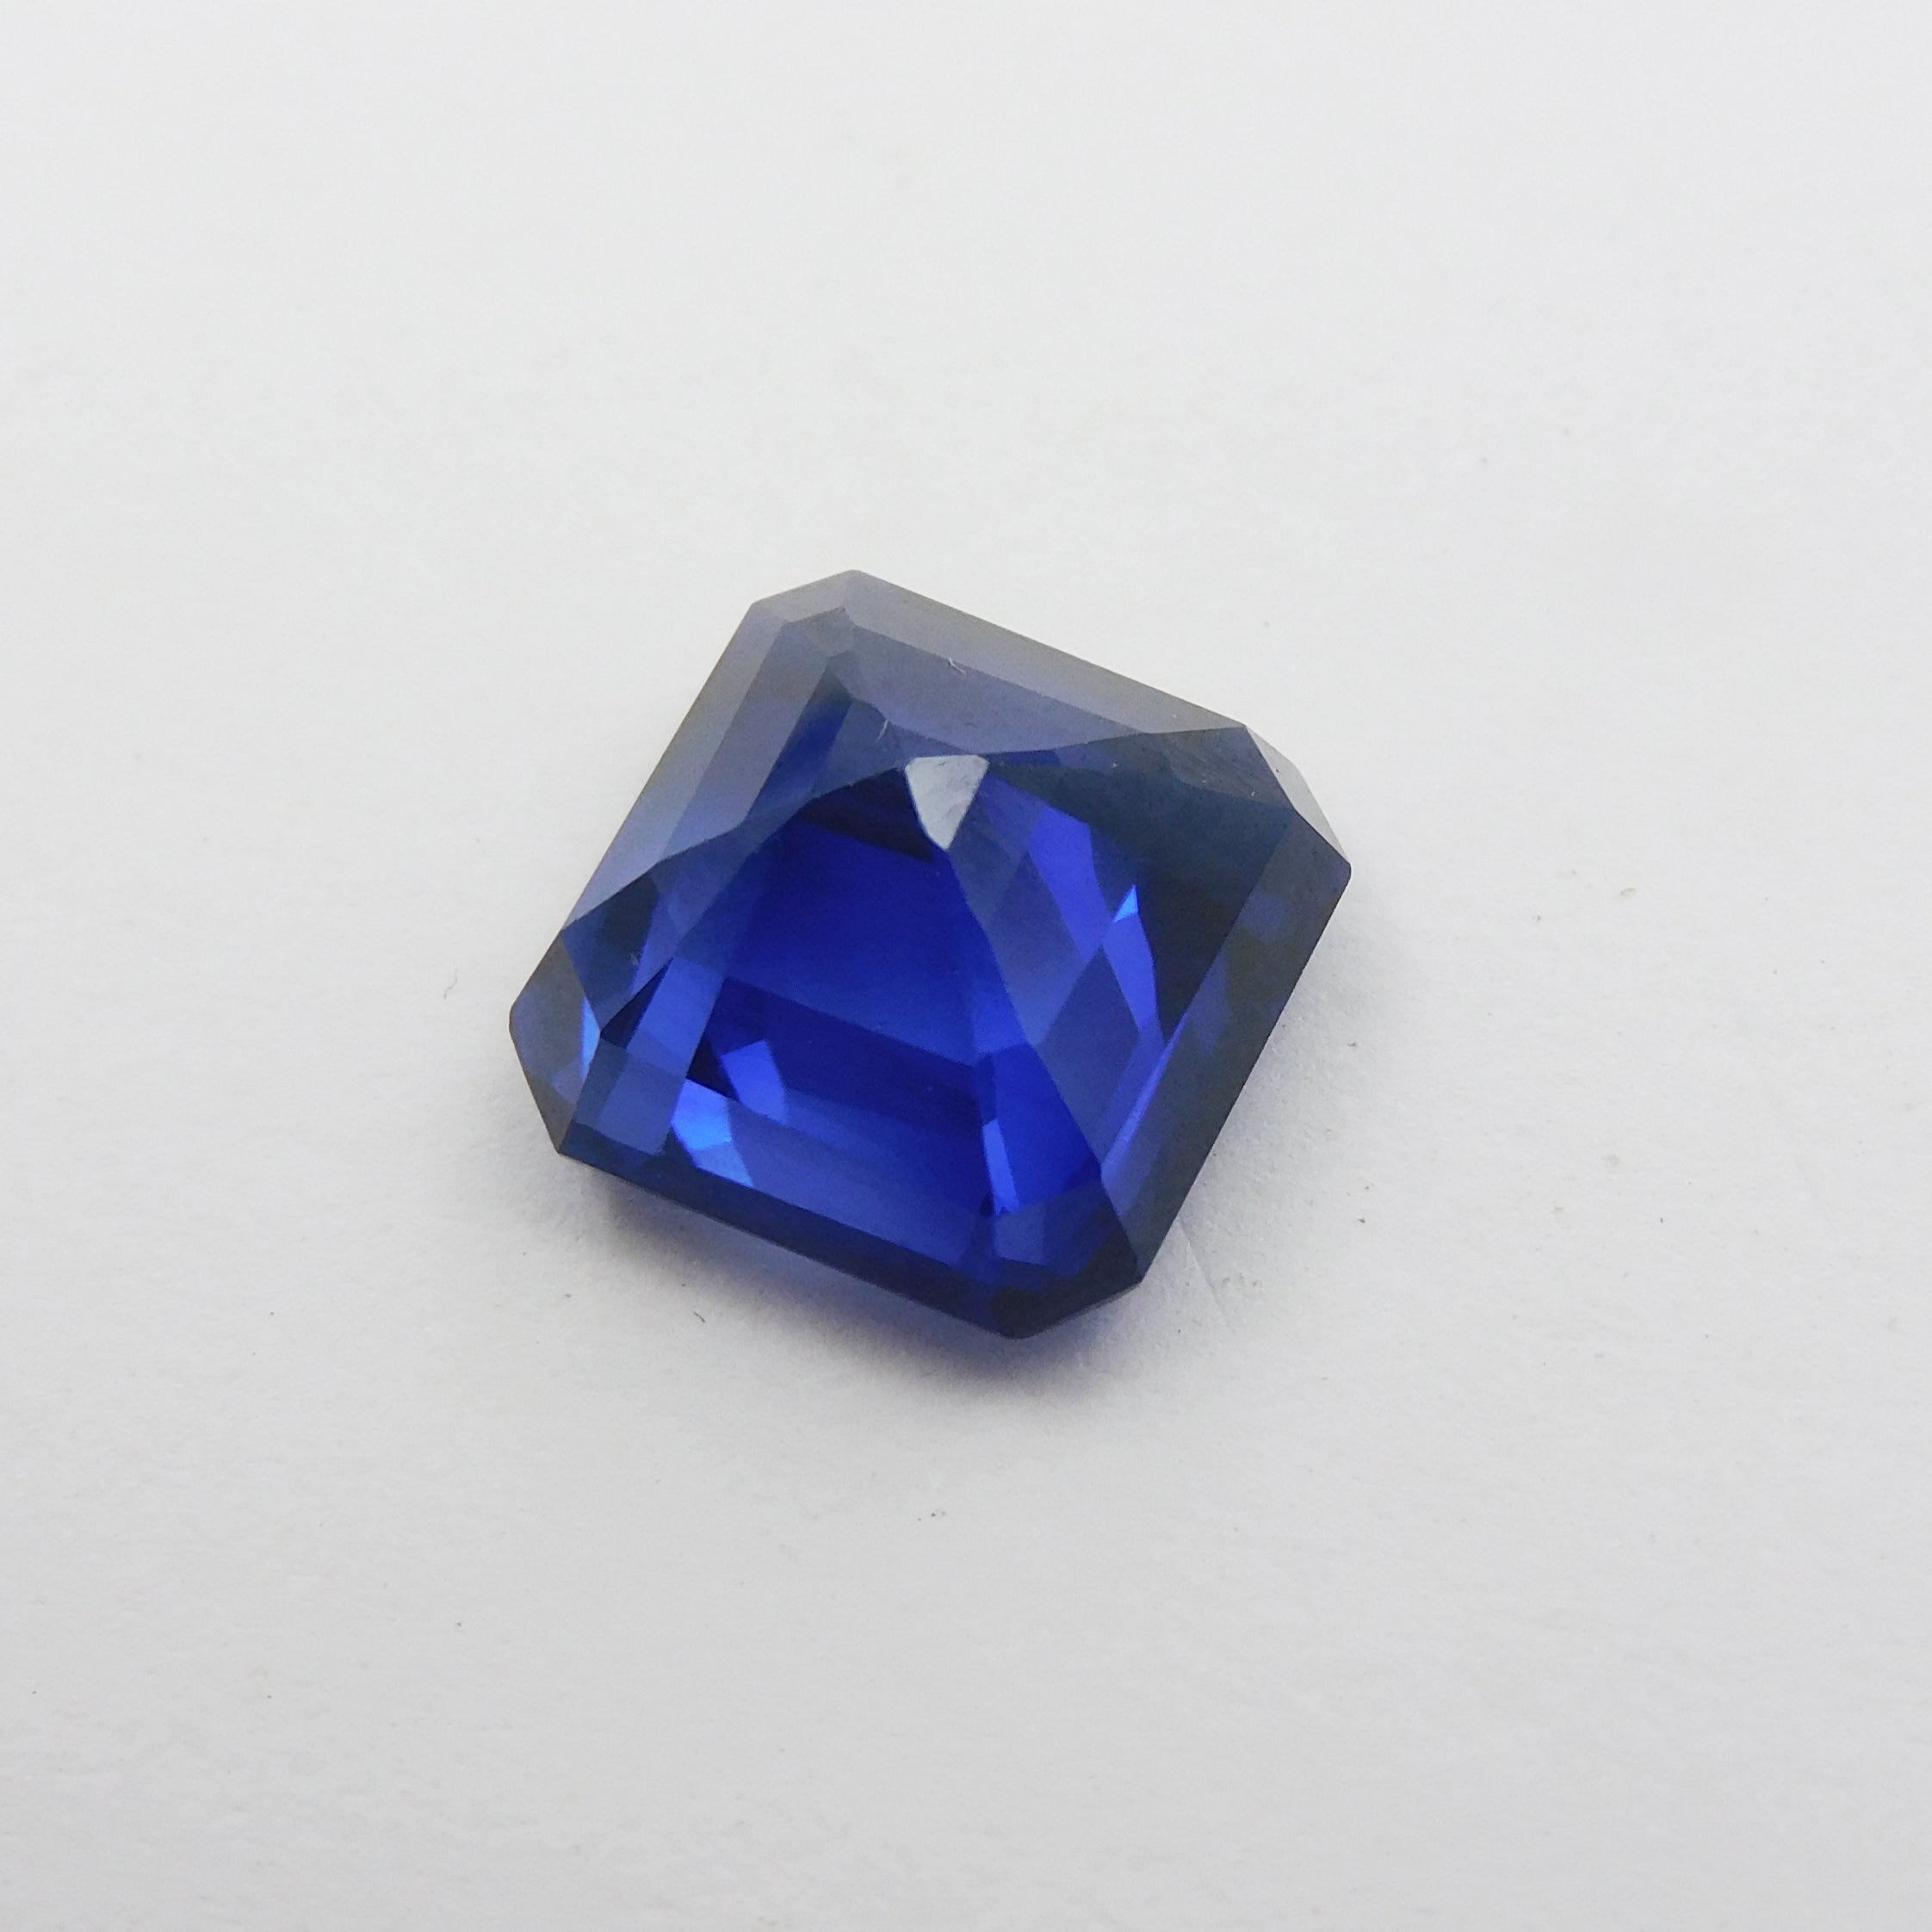 Exclusive Offer !!! Natural Certified 9.65 Carat Square Cut Blue Dark Tanzanite Loose Gemstone | Free Shipping With Extra Special Gift | Charming Tanzanite" DARK BLUE "